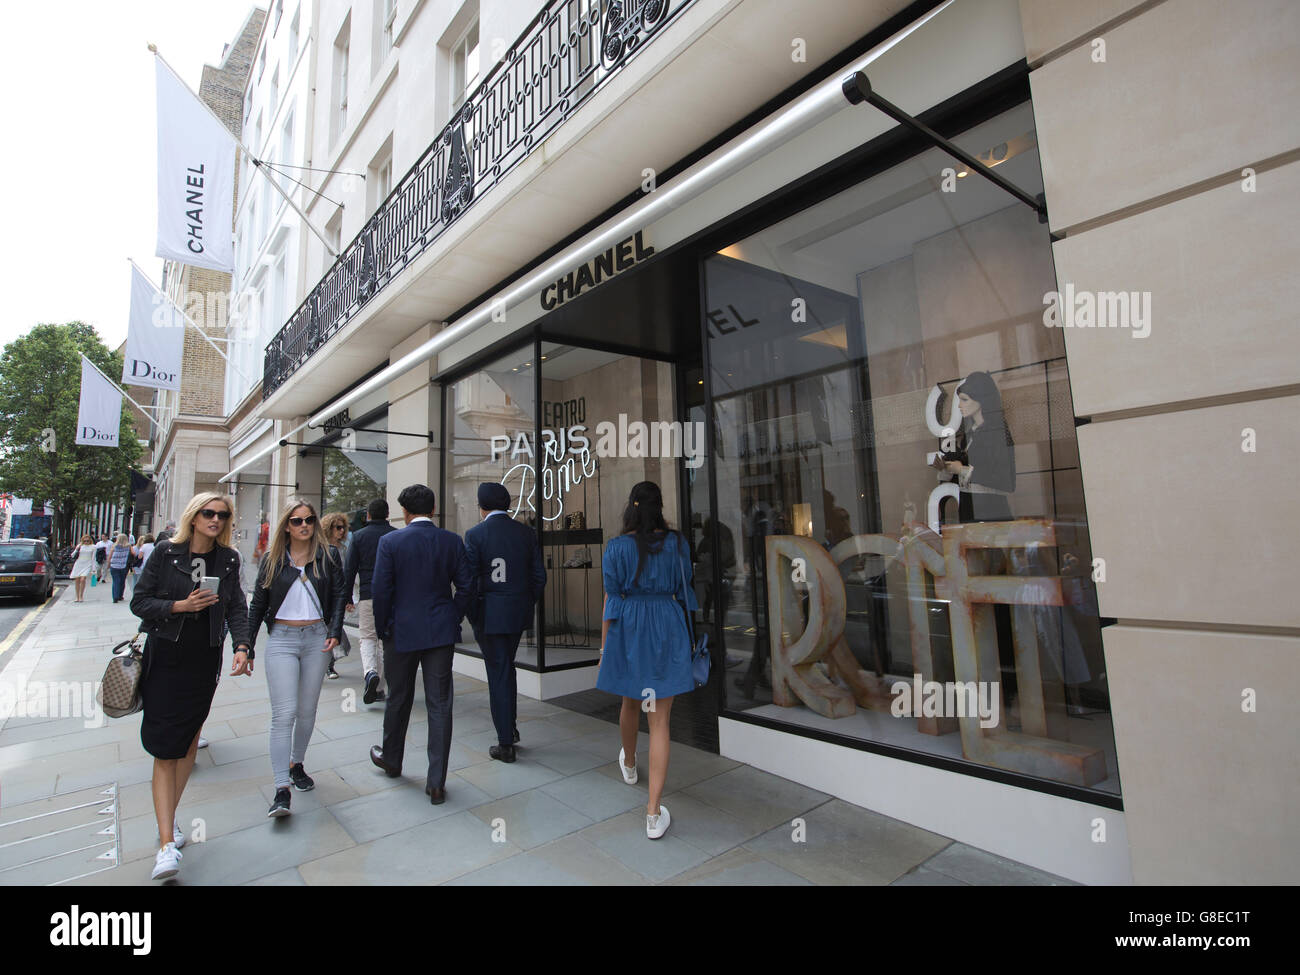 Chanel boutique, New Bond Street in the West End of London